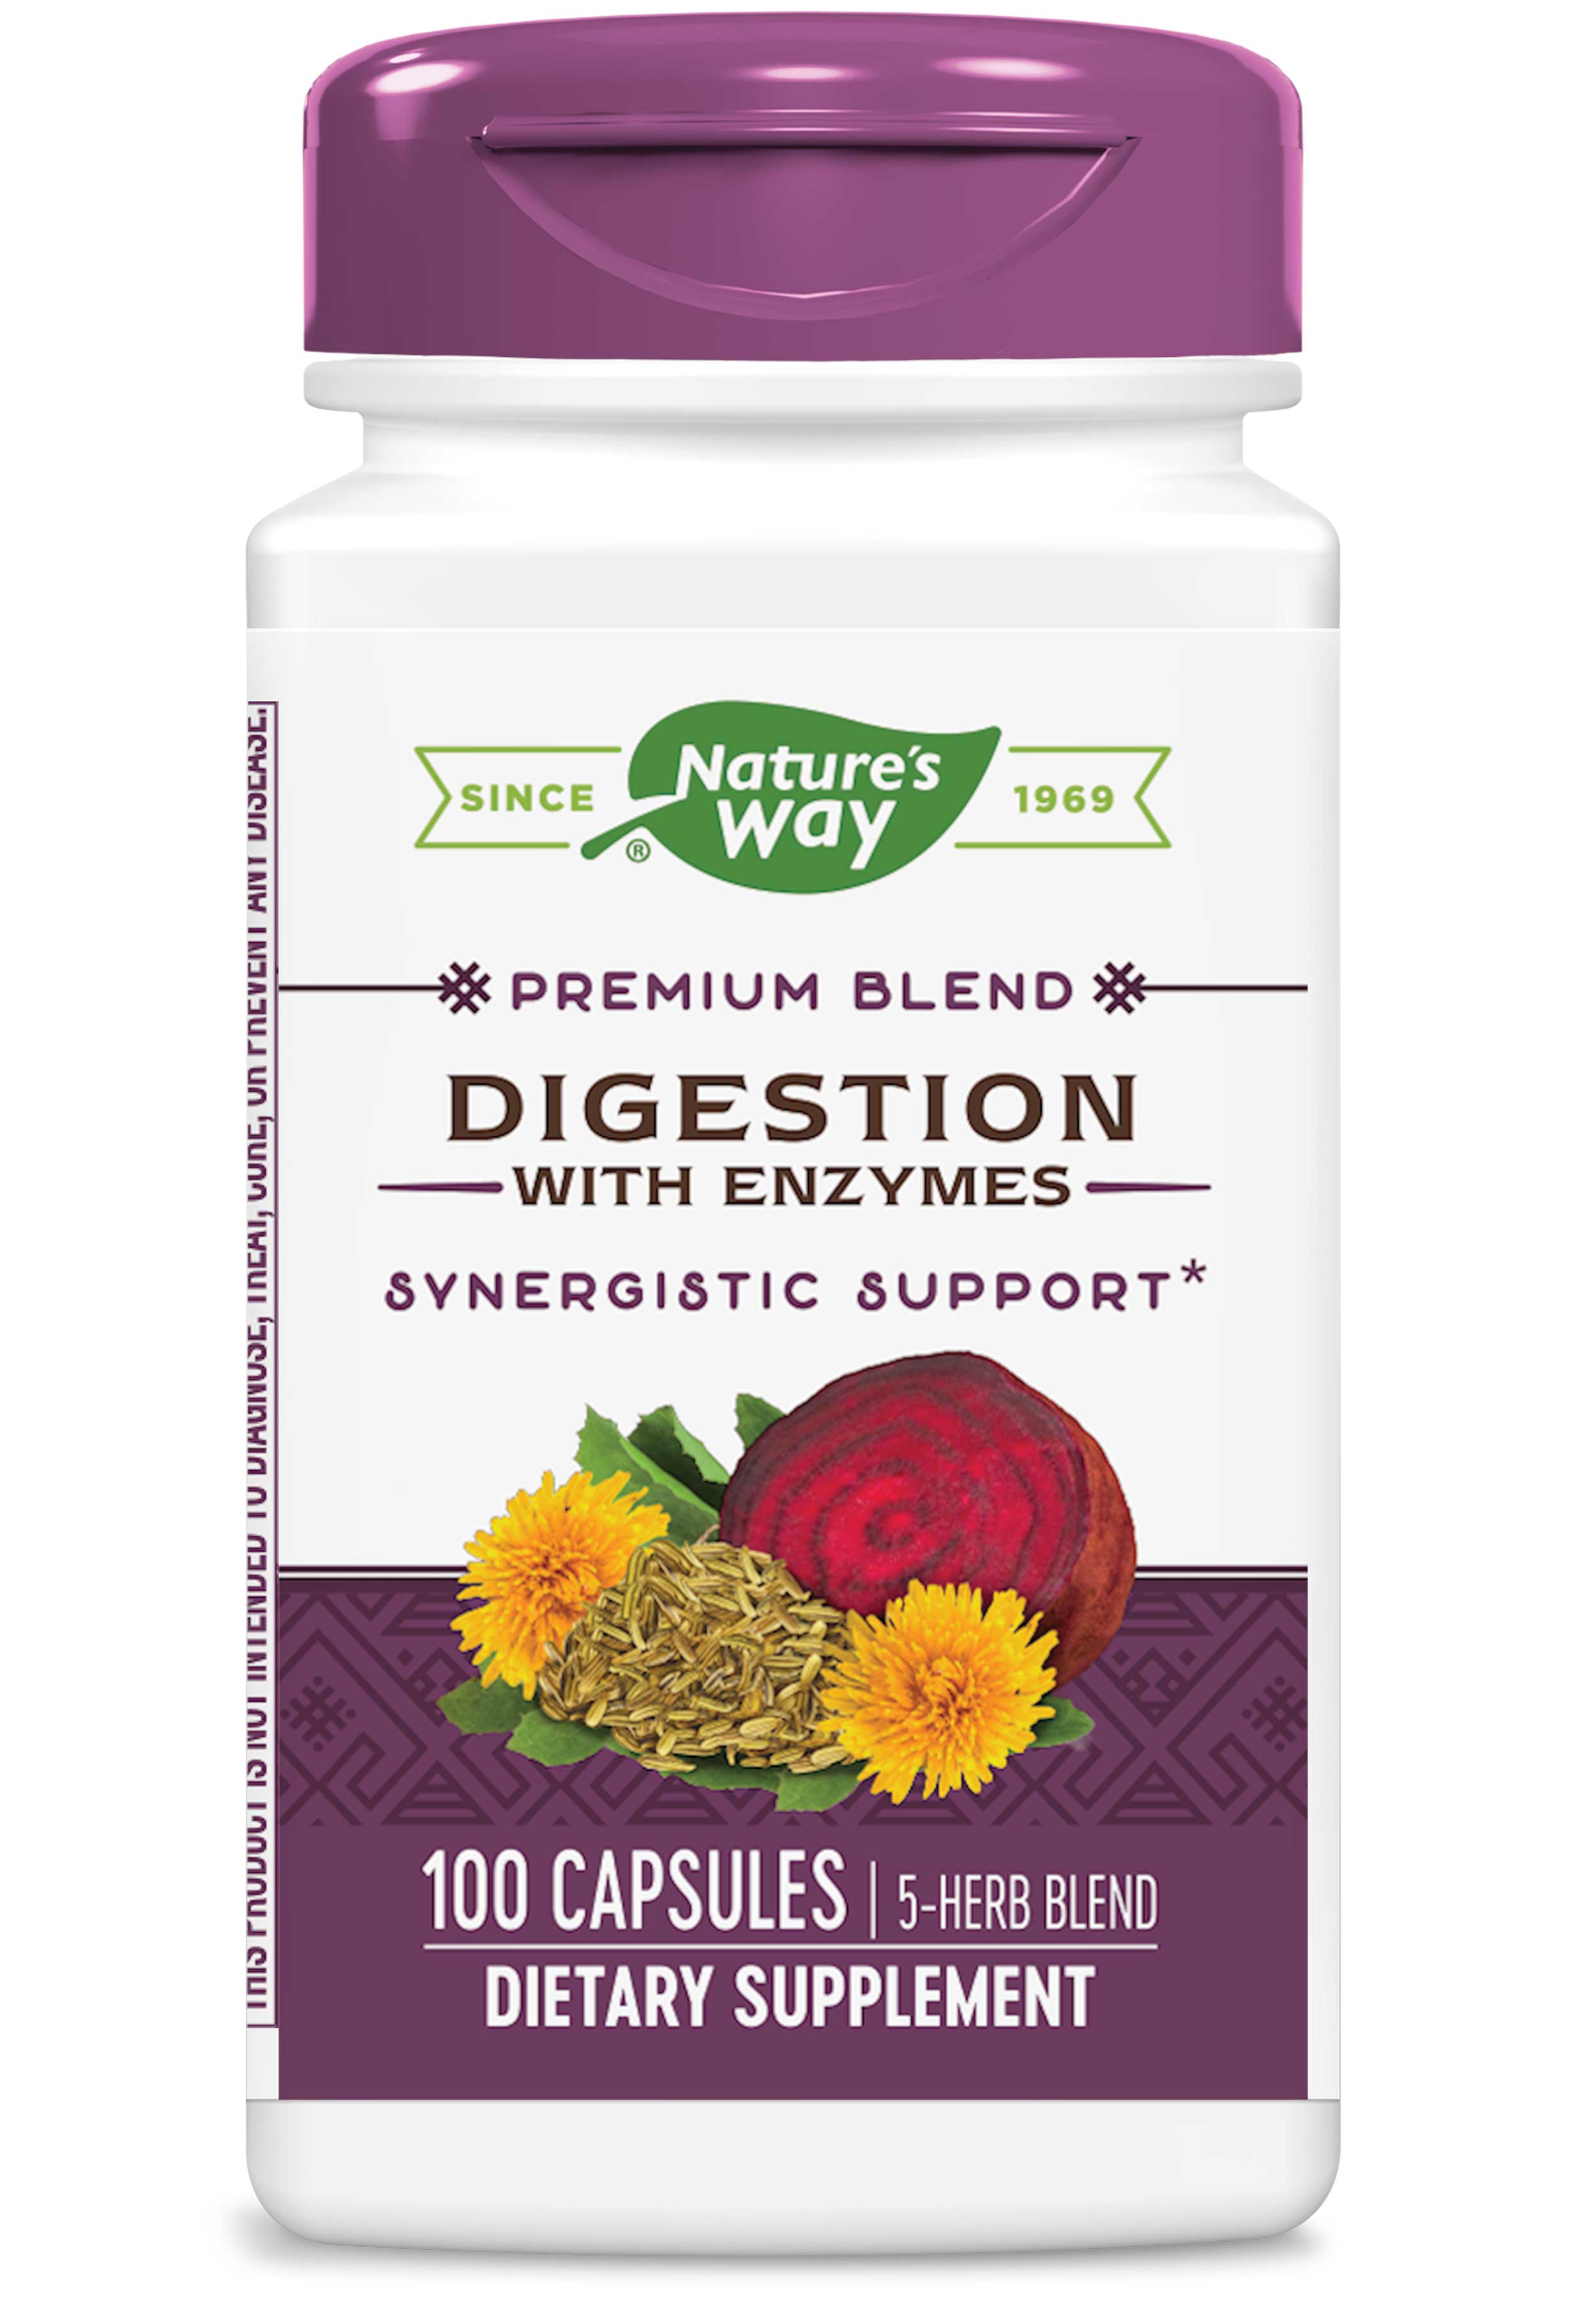 Nature's Way Digestion with Enzymes